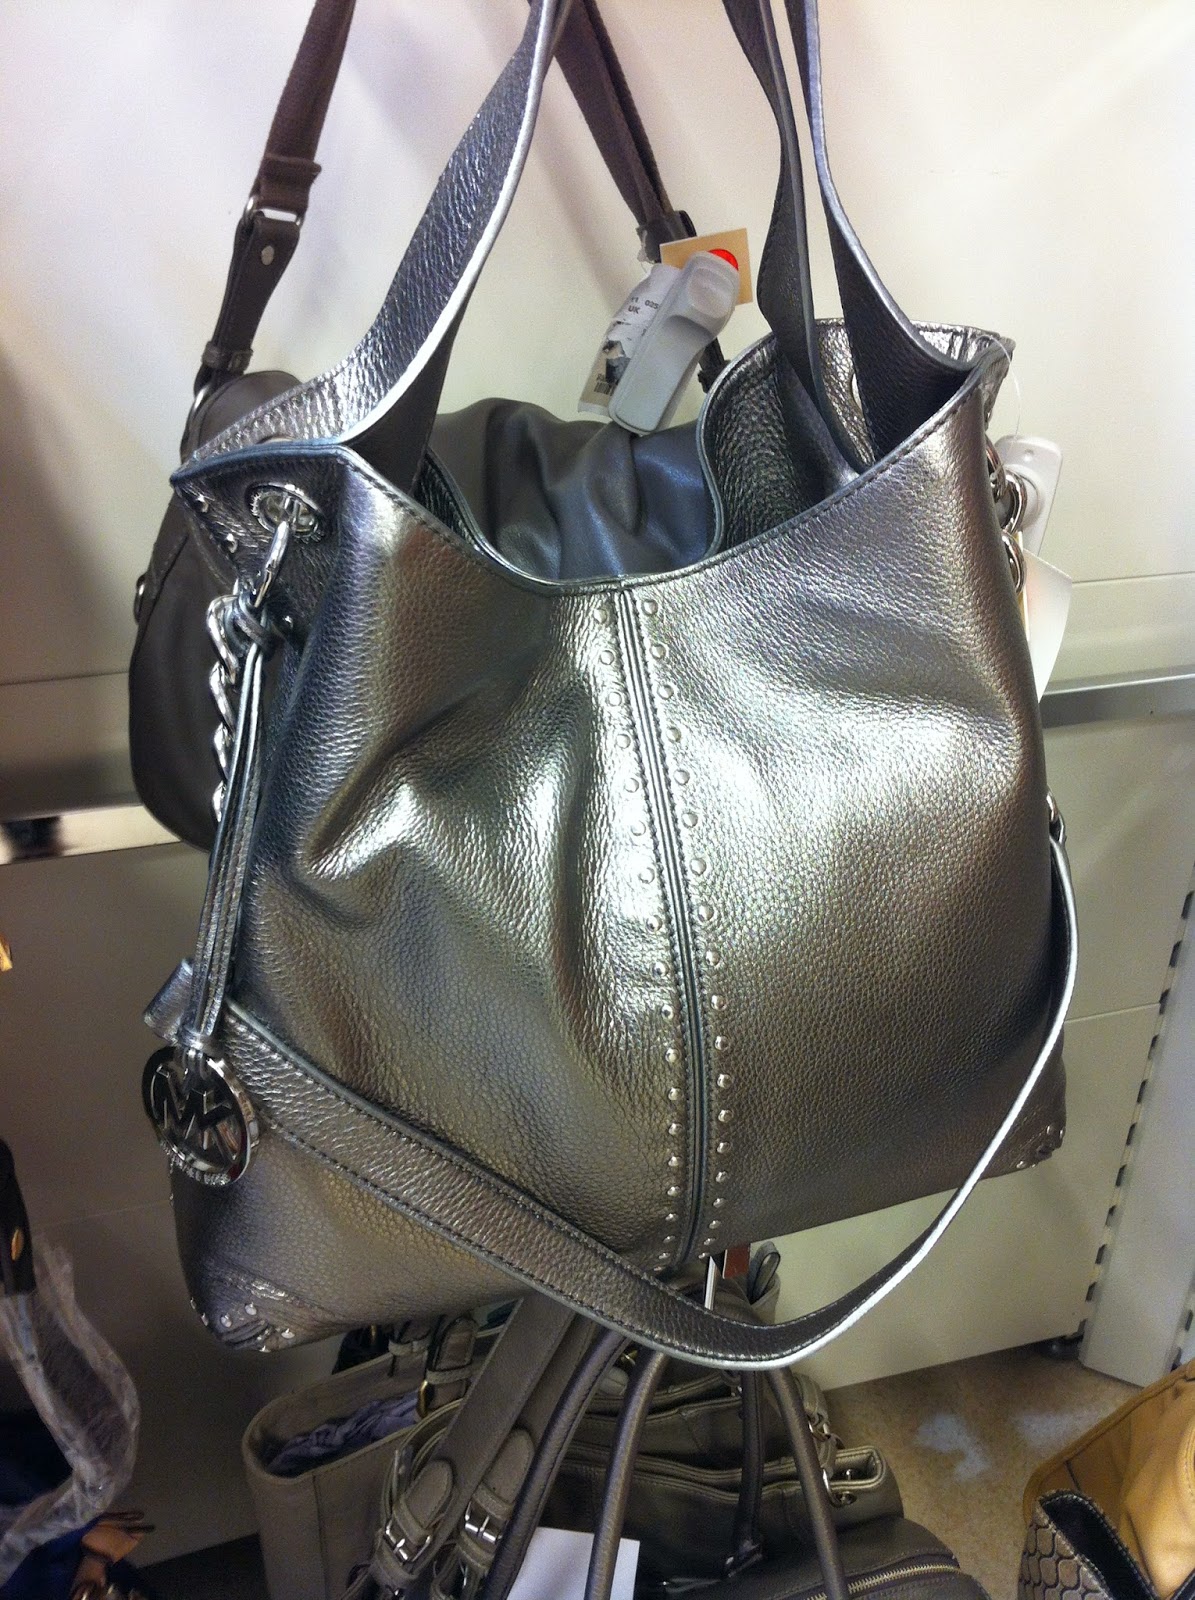 Sale > tk maxx black leather bags > in stock